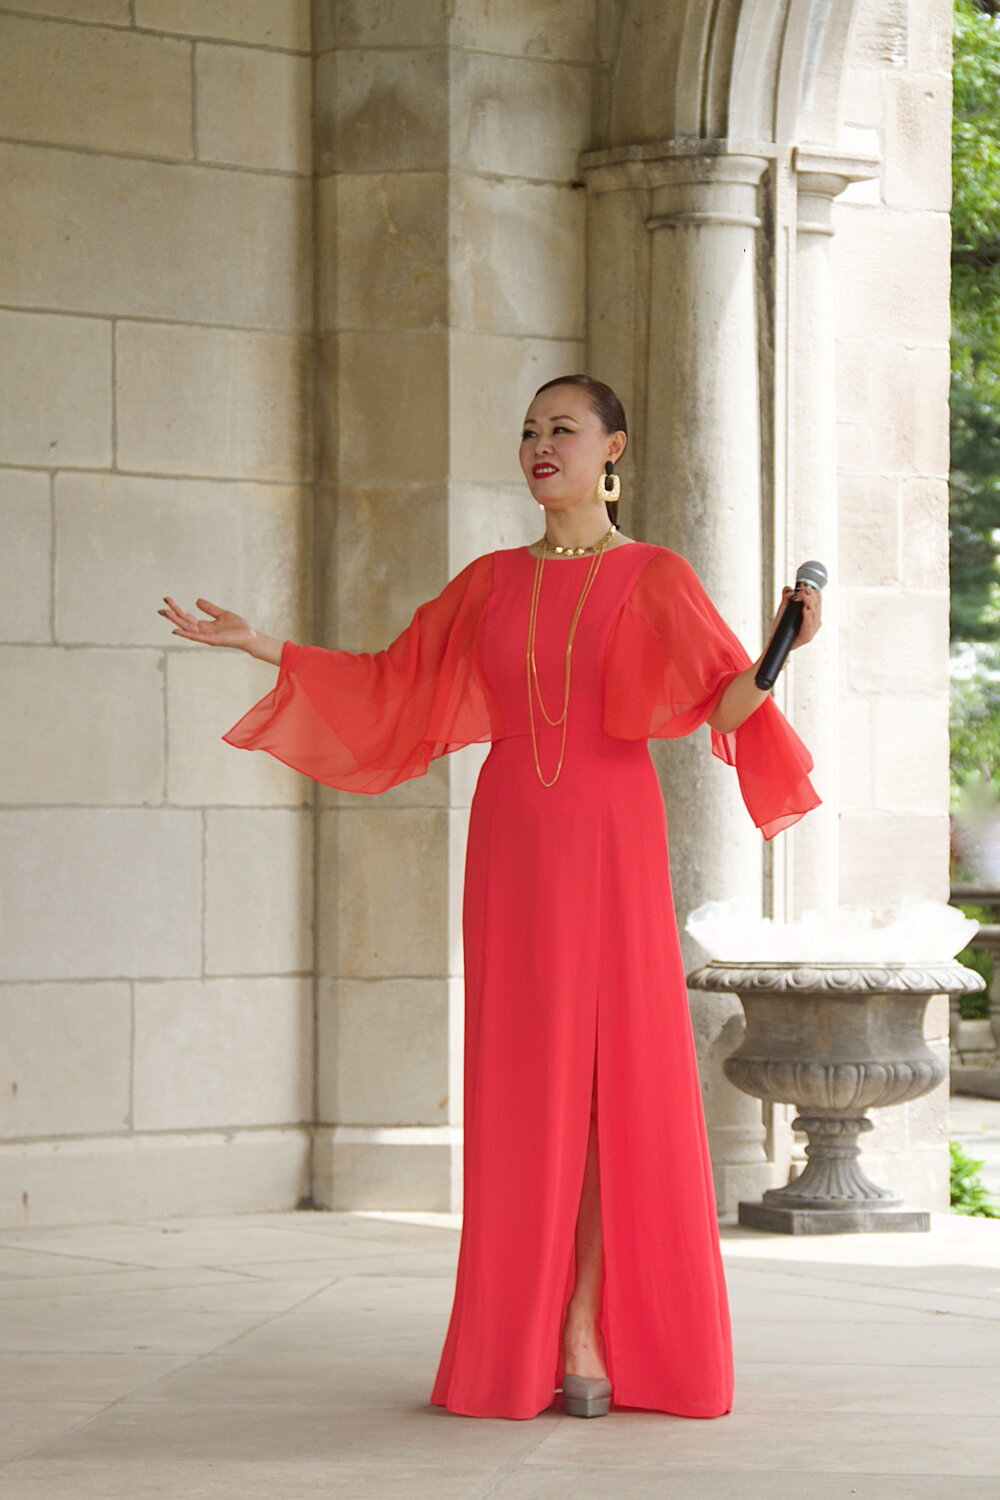 Soprano Jojo Feng, serenaded the crowd at the historic Planting Fields Arboretum.